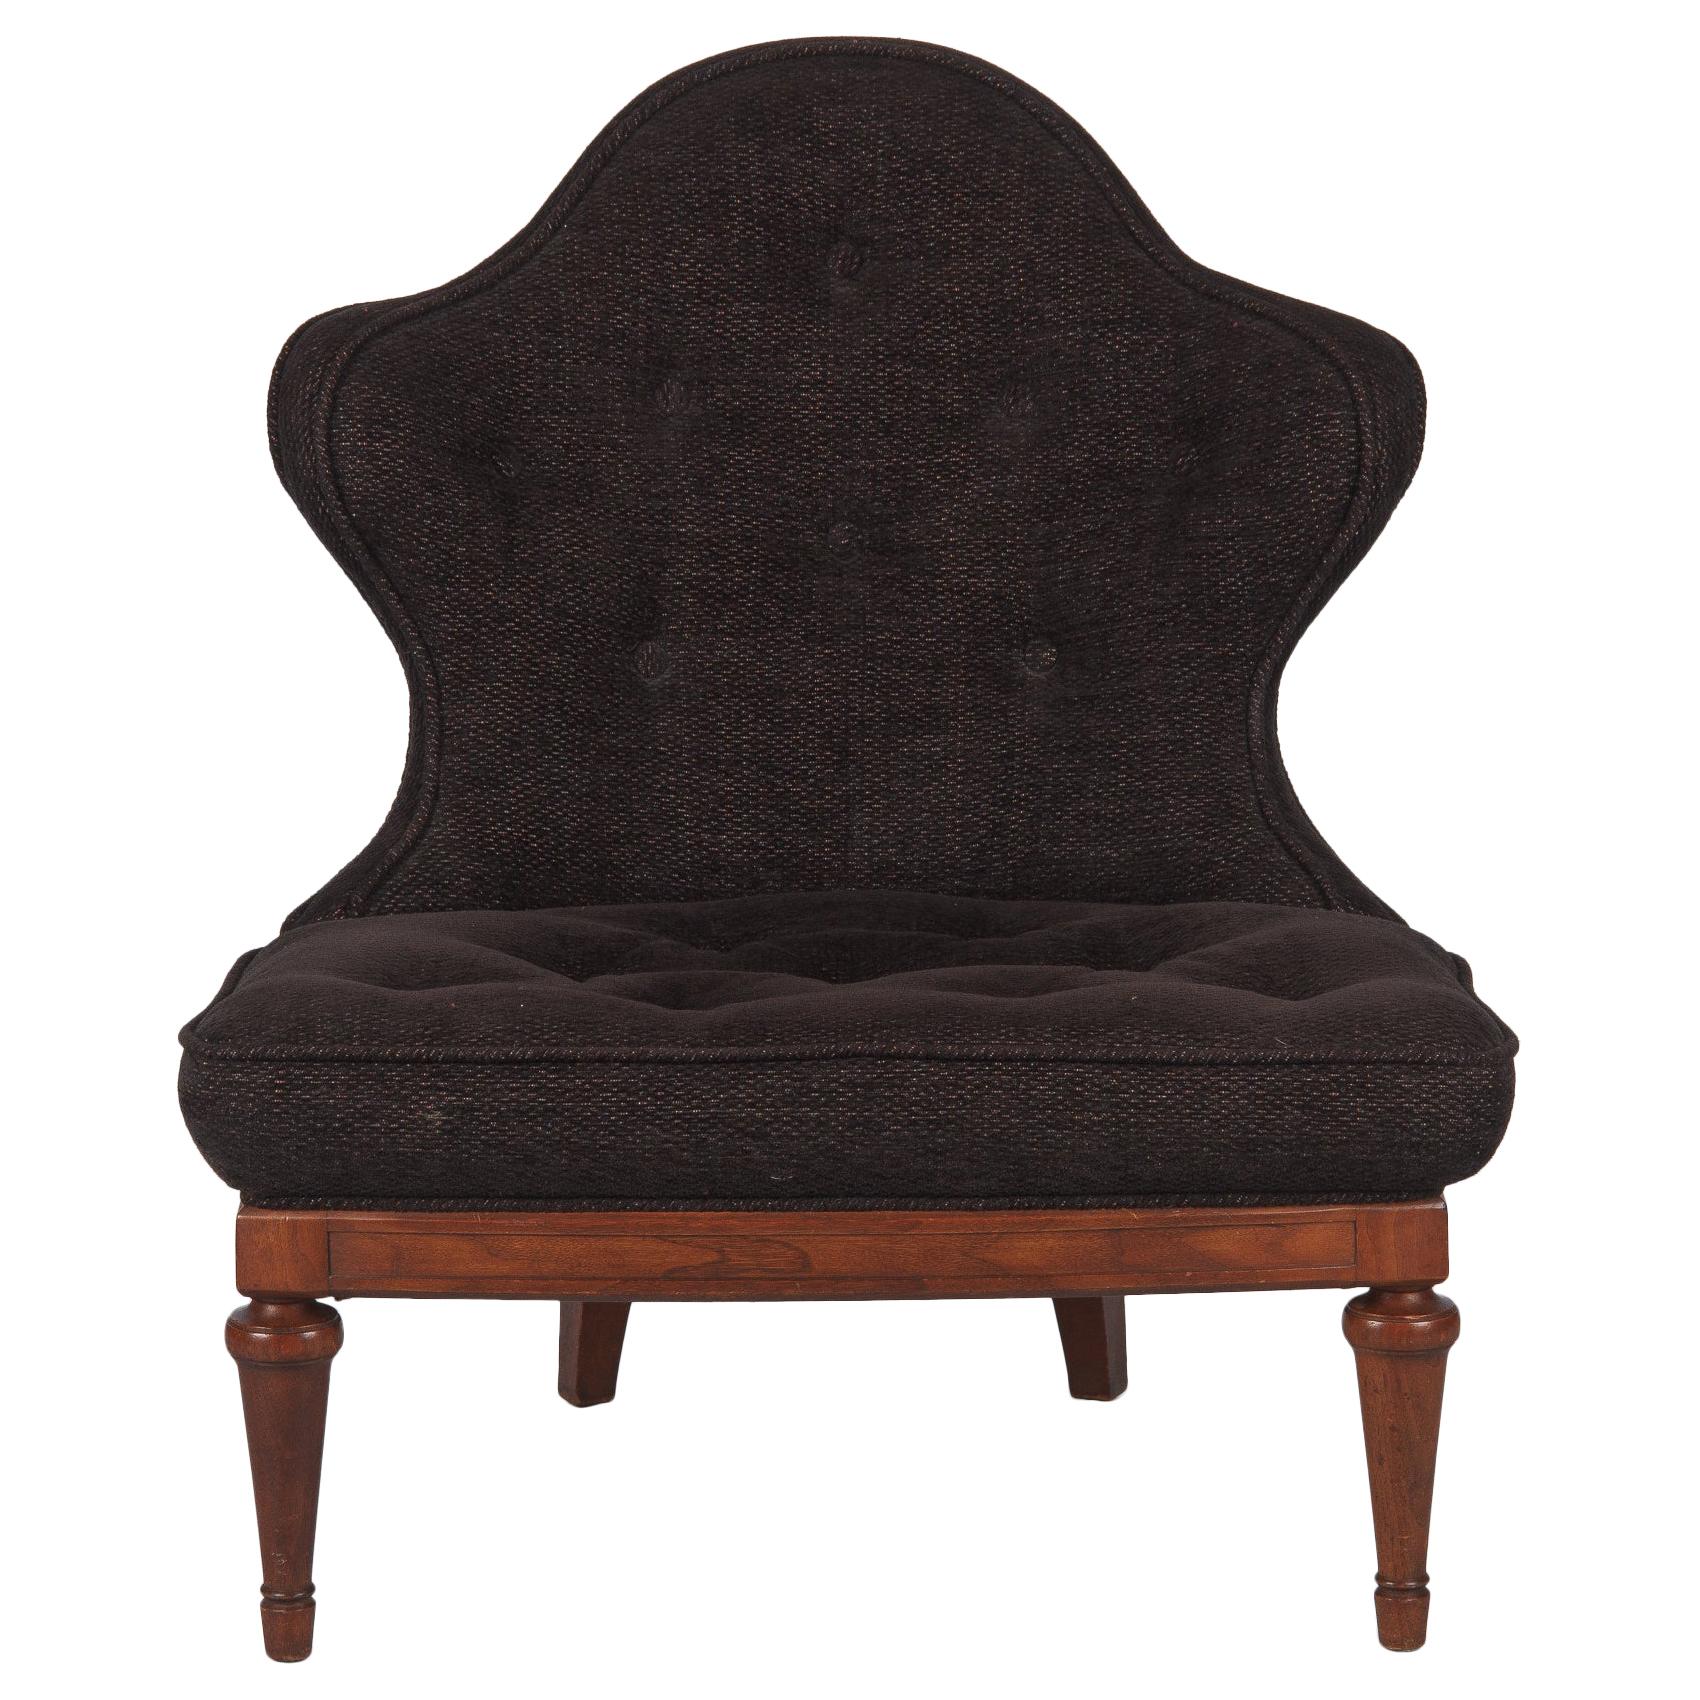 1960s Hollywood Regency Crest-Back Button-Tufted Chair